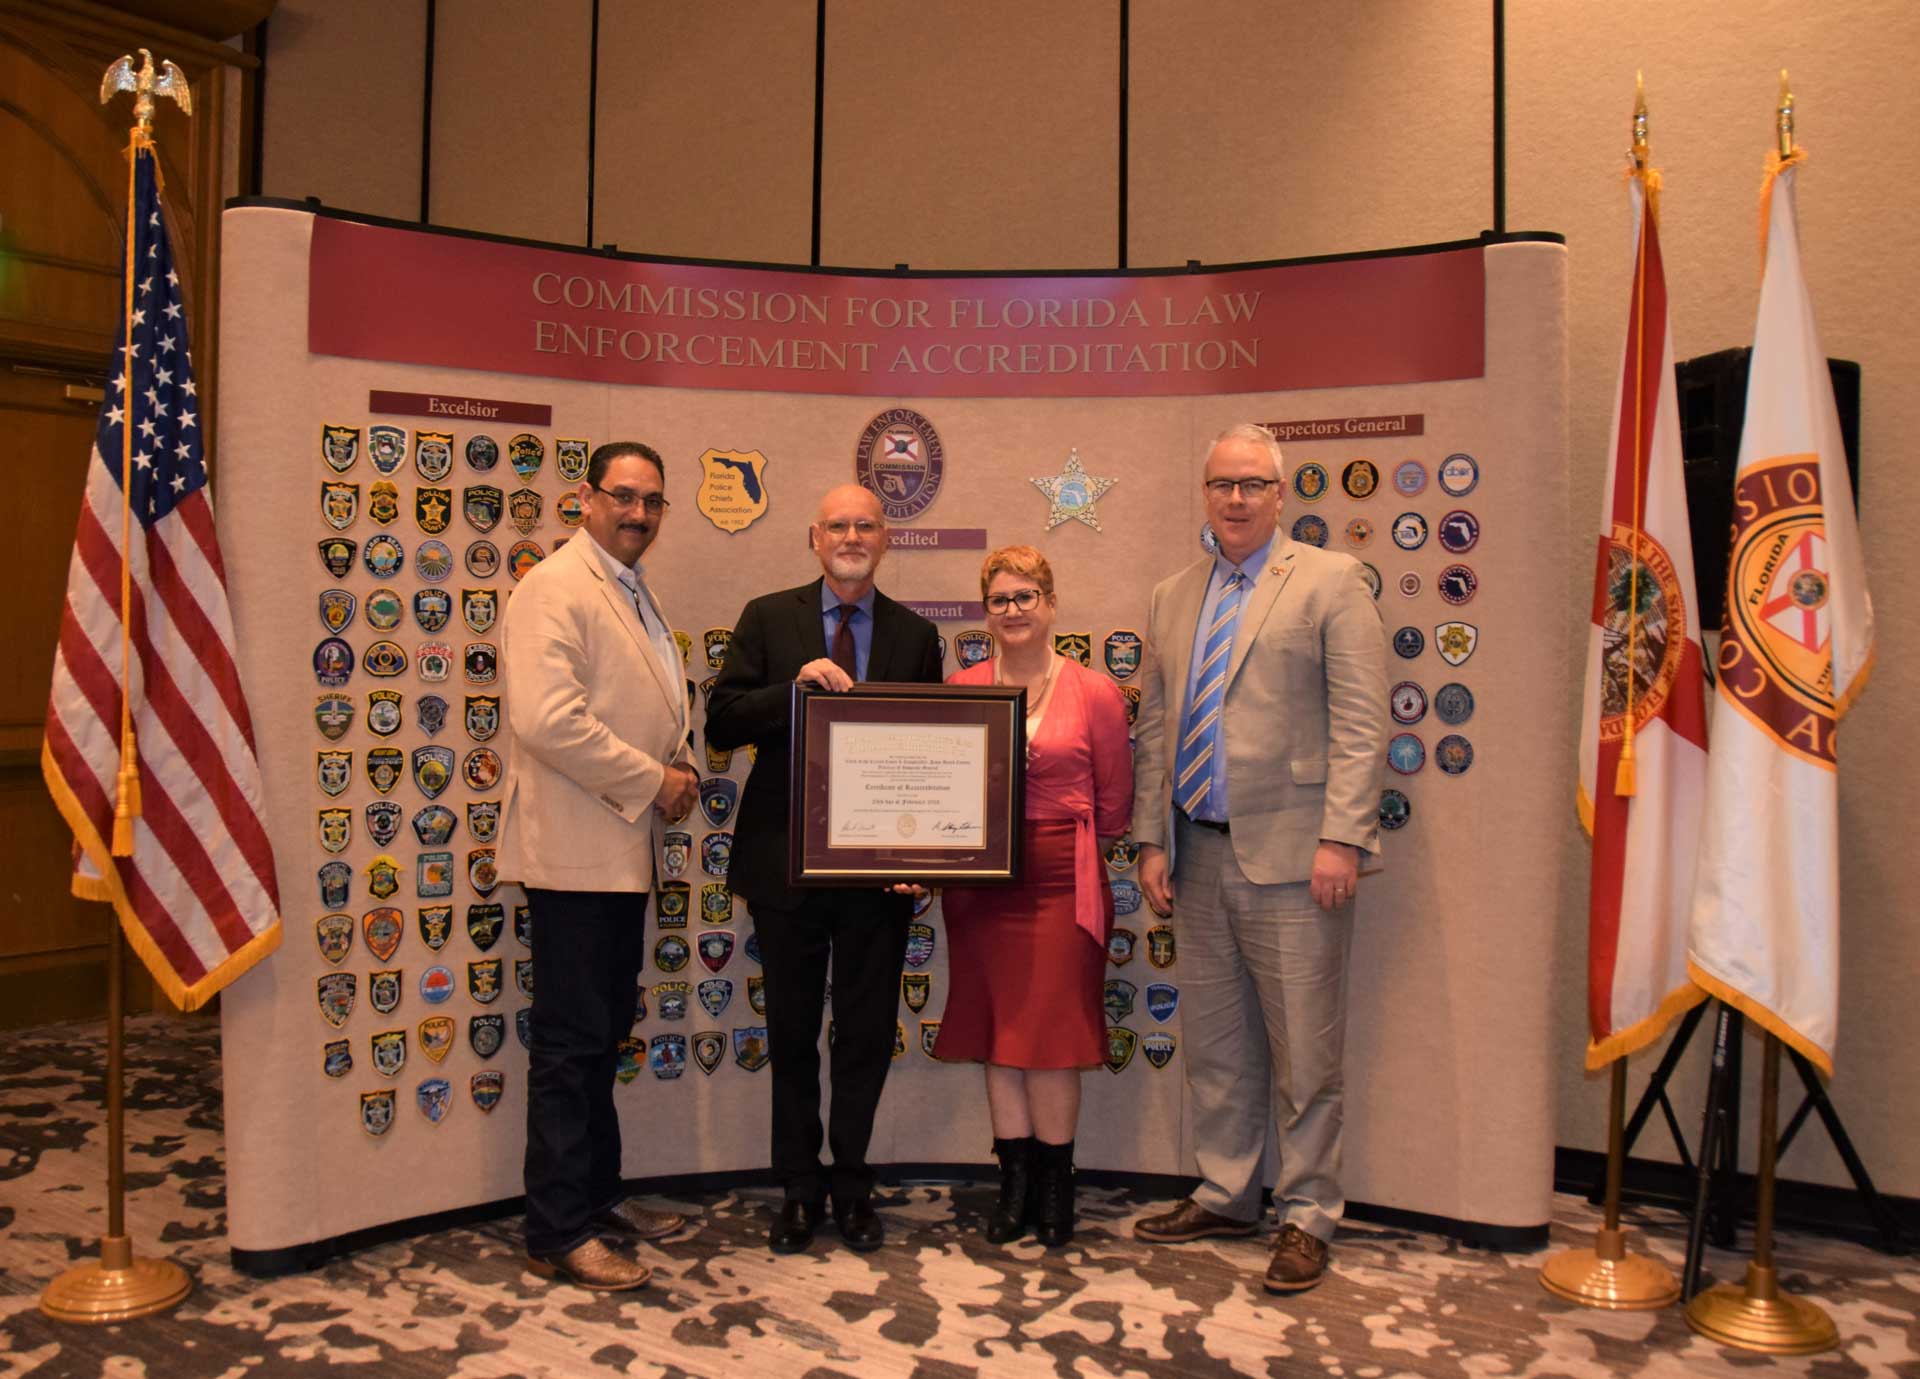 Clerk staff accept accreditation from the Commission for Florida Law Enforcement Accreditation